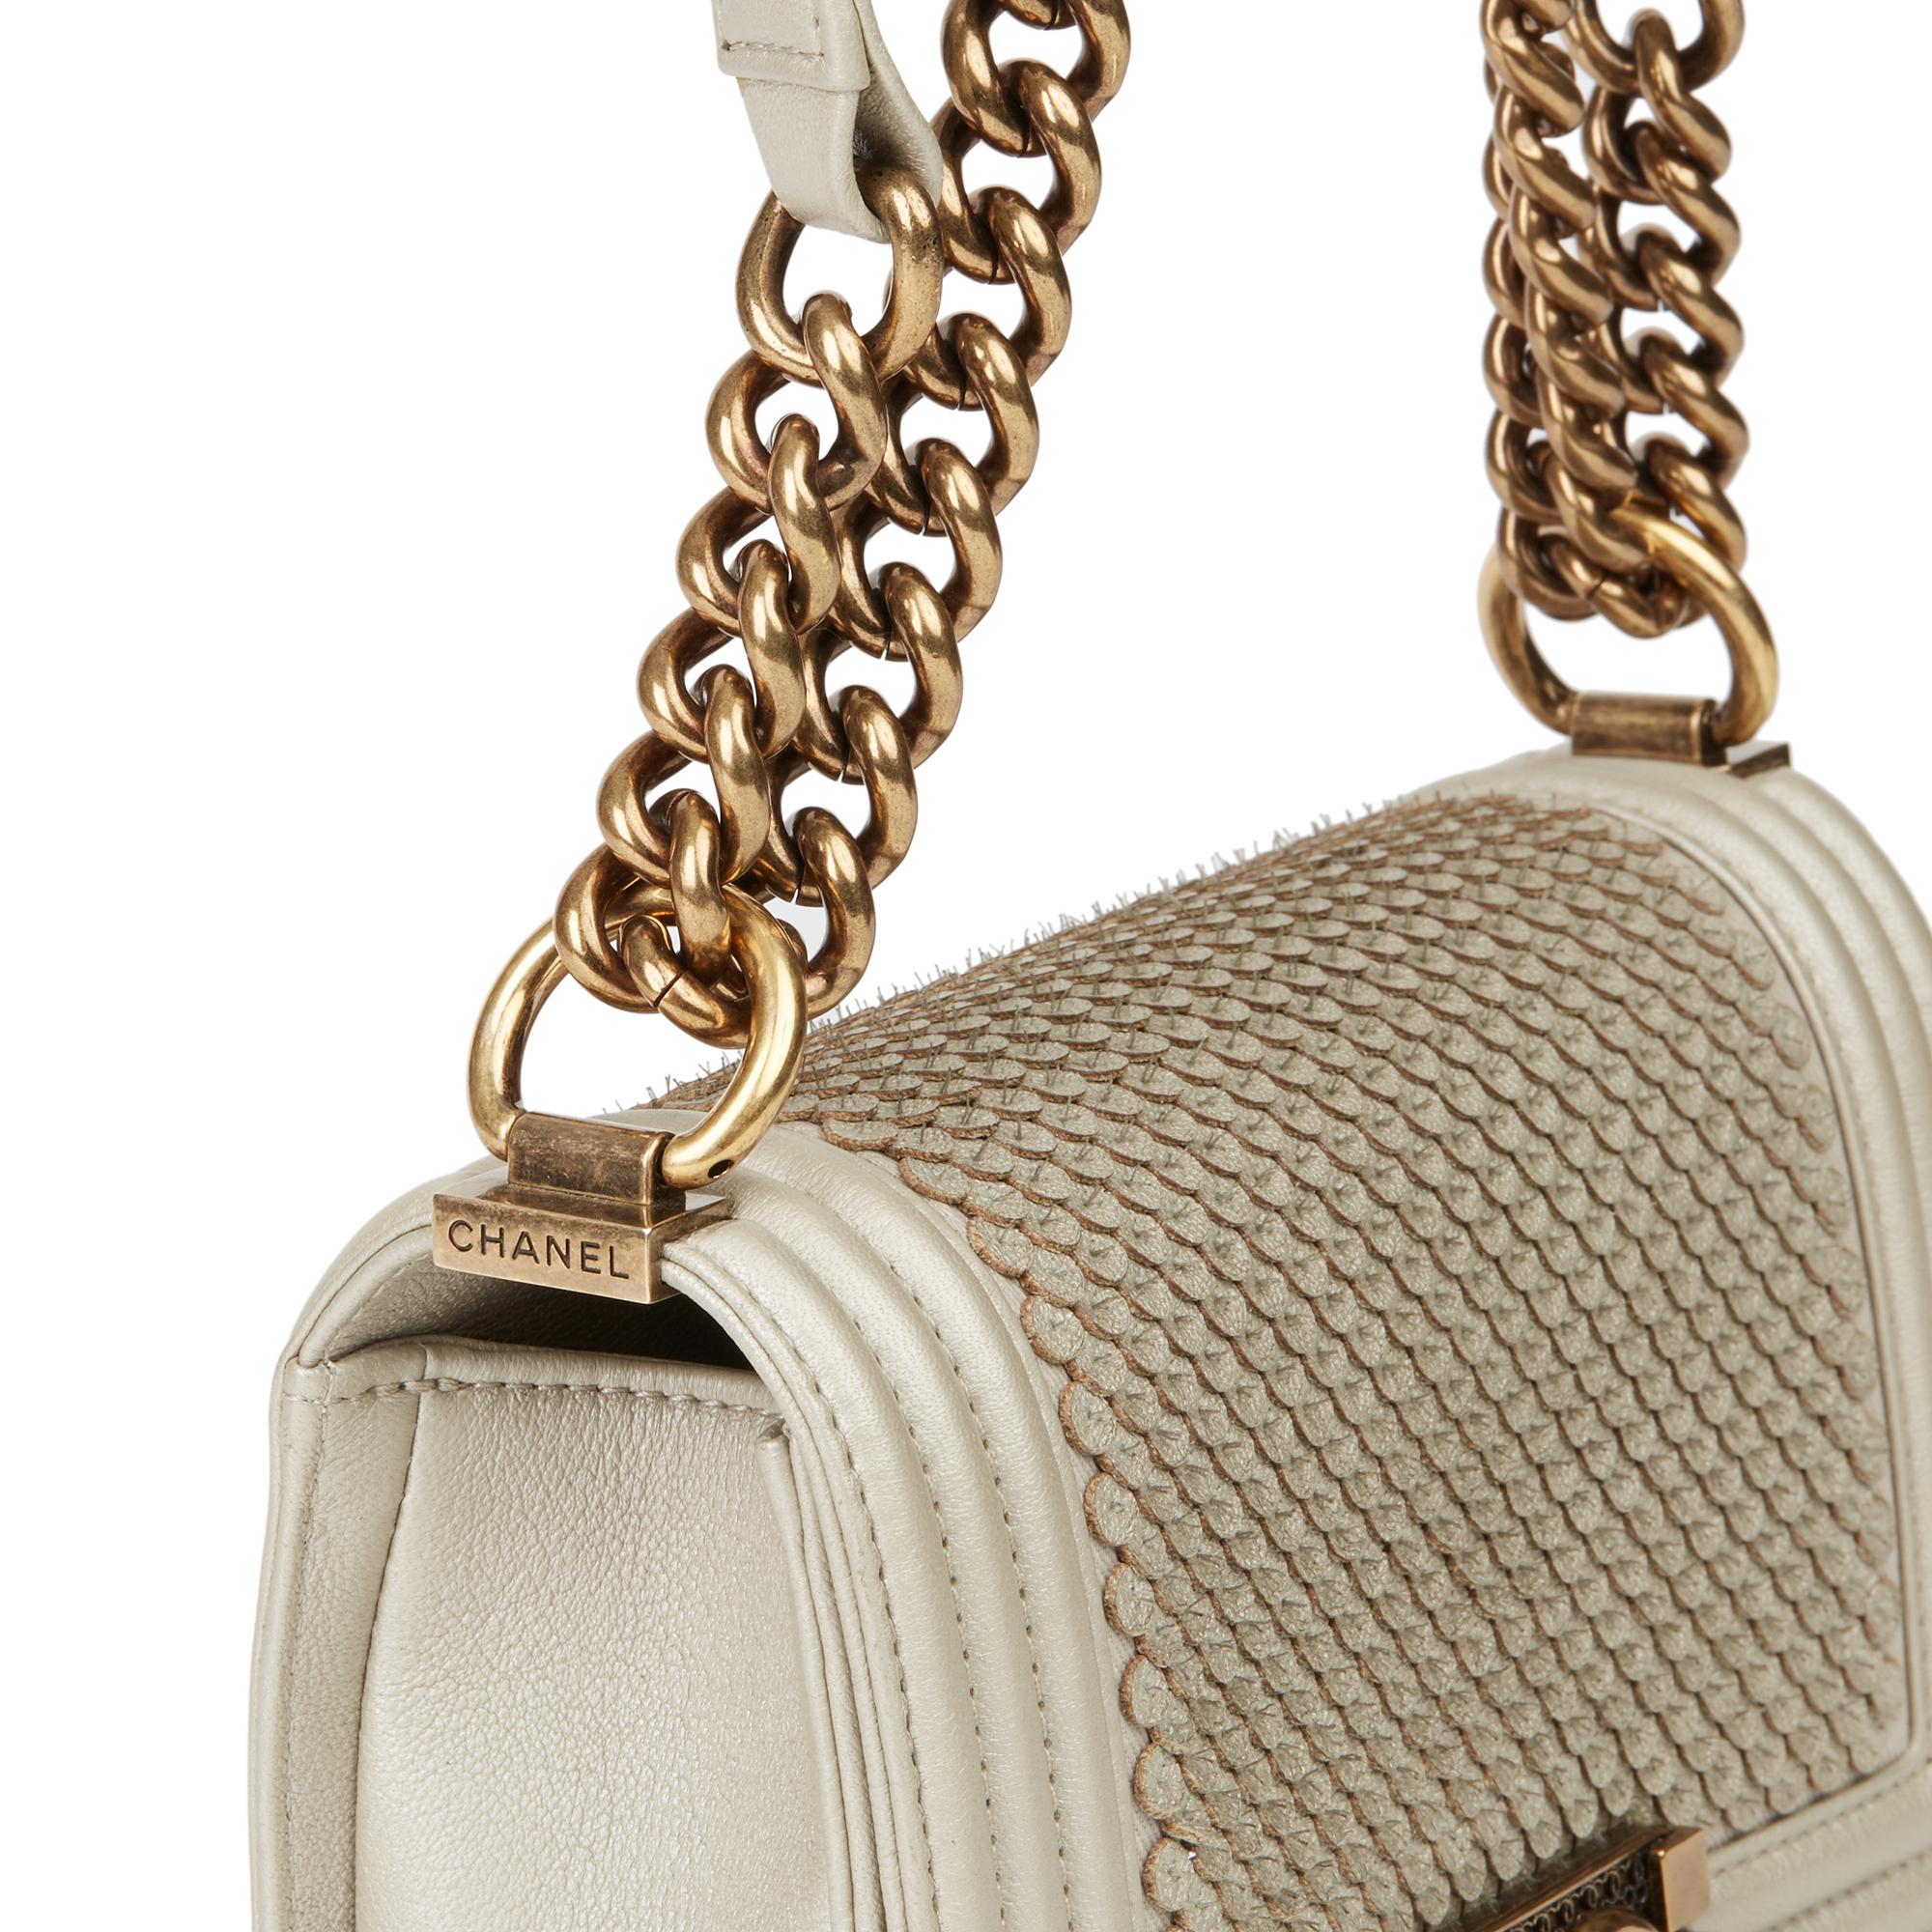 2015 Chanel Light Gold Scaled Metallic Calfskin Leather Small Le Boy 4